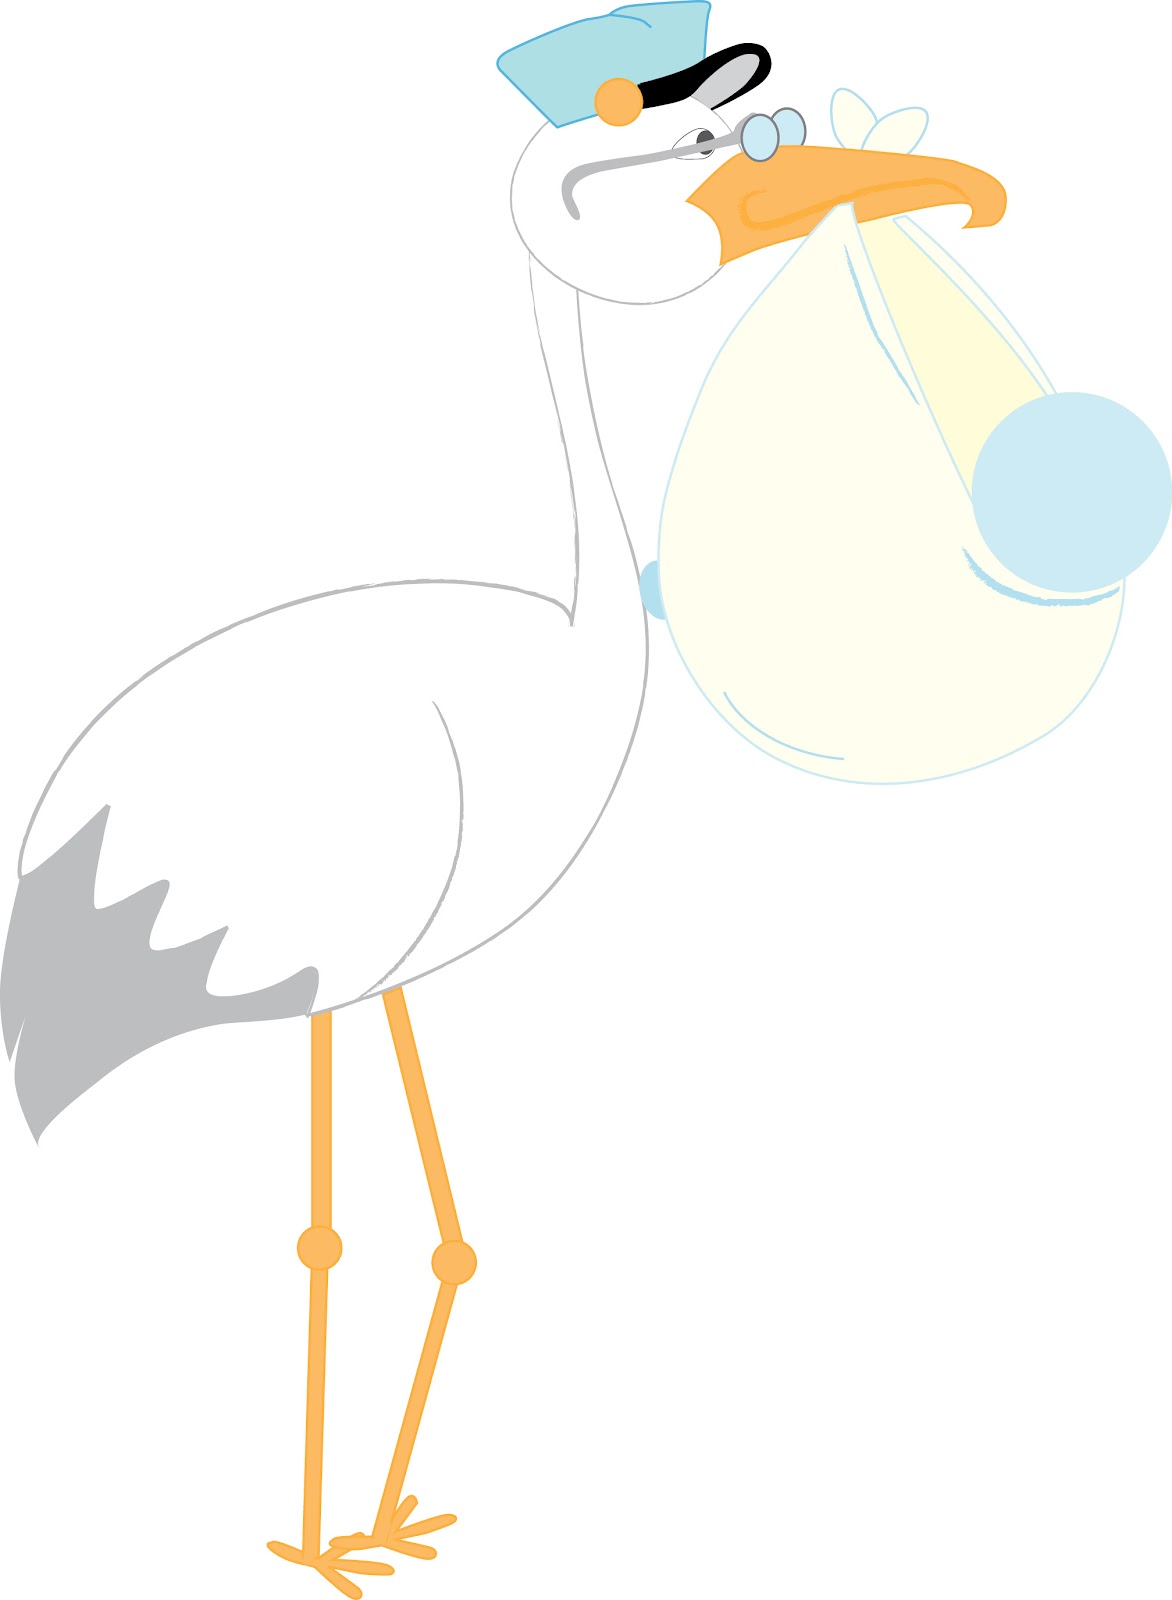 stork and baby clipart free - photo #17